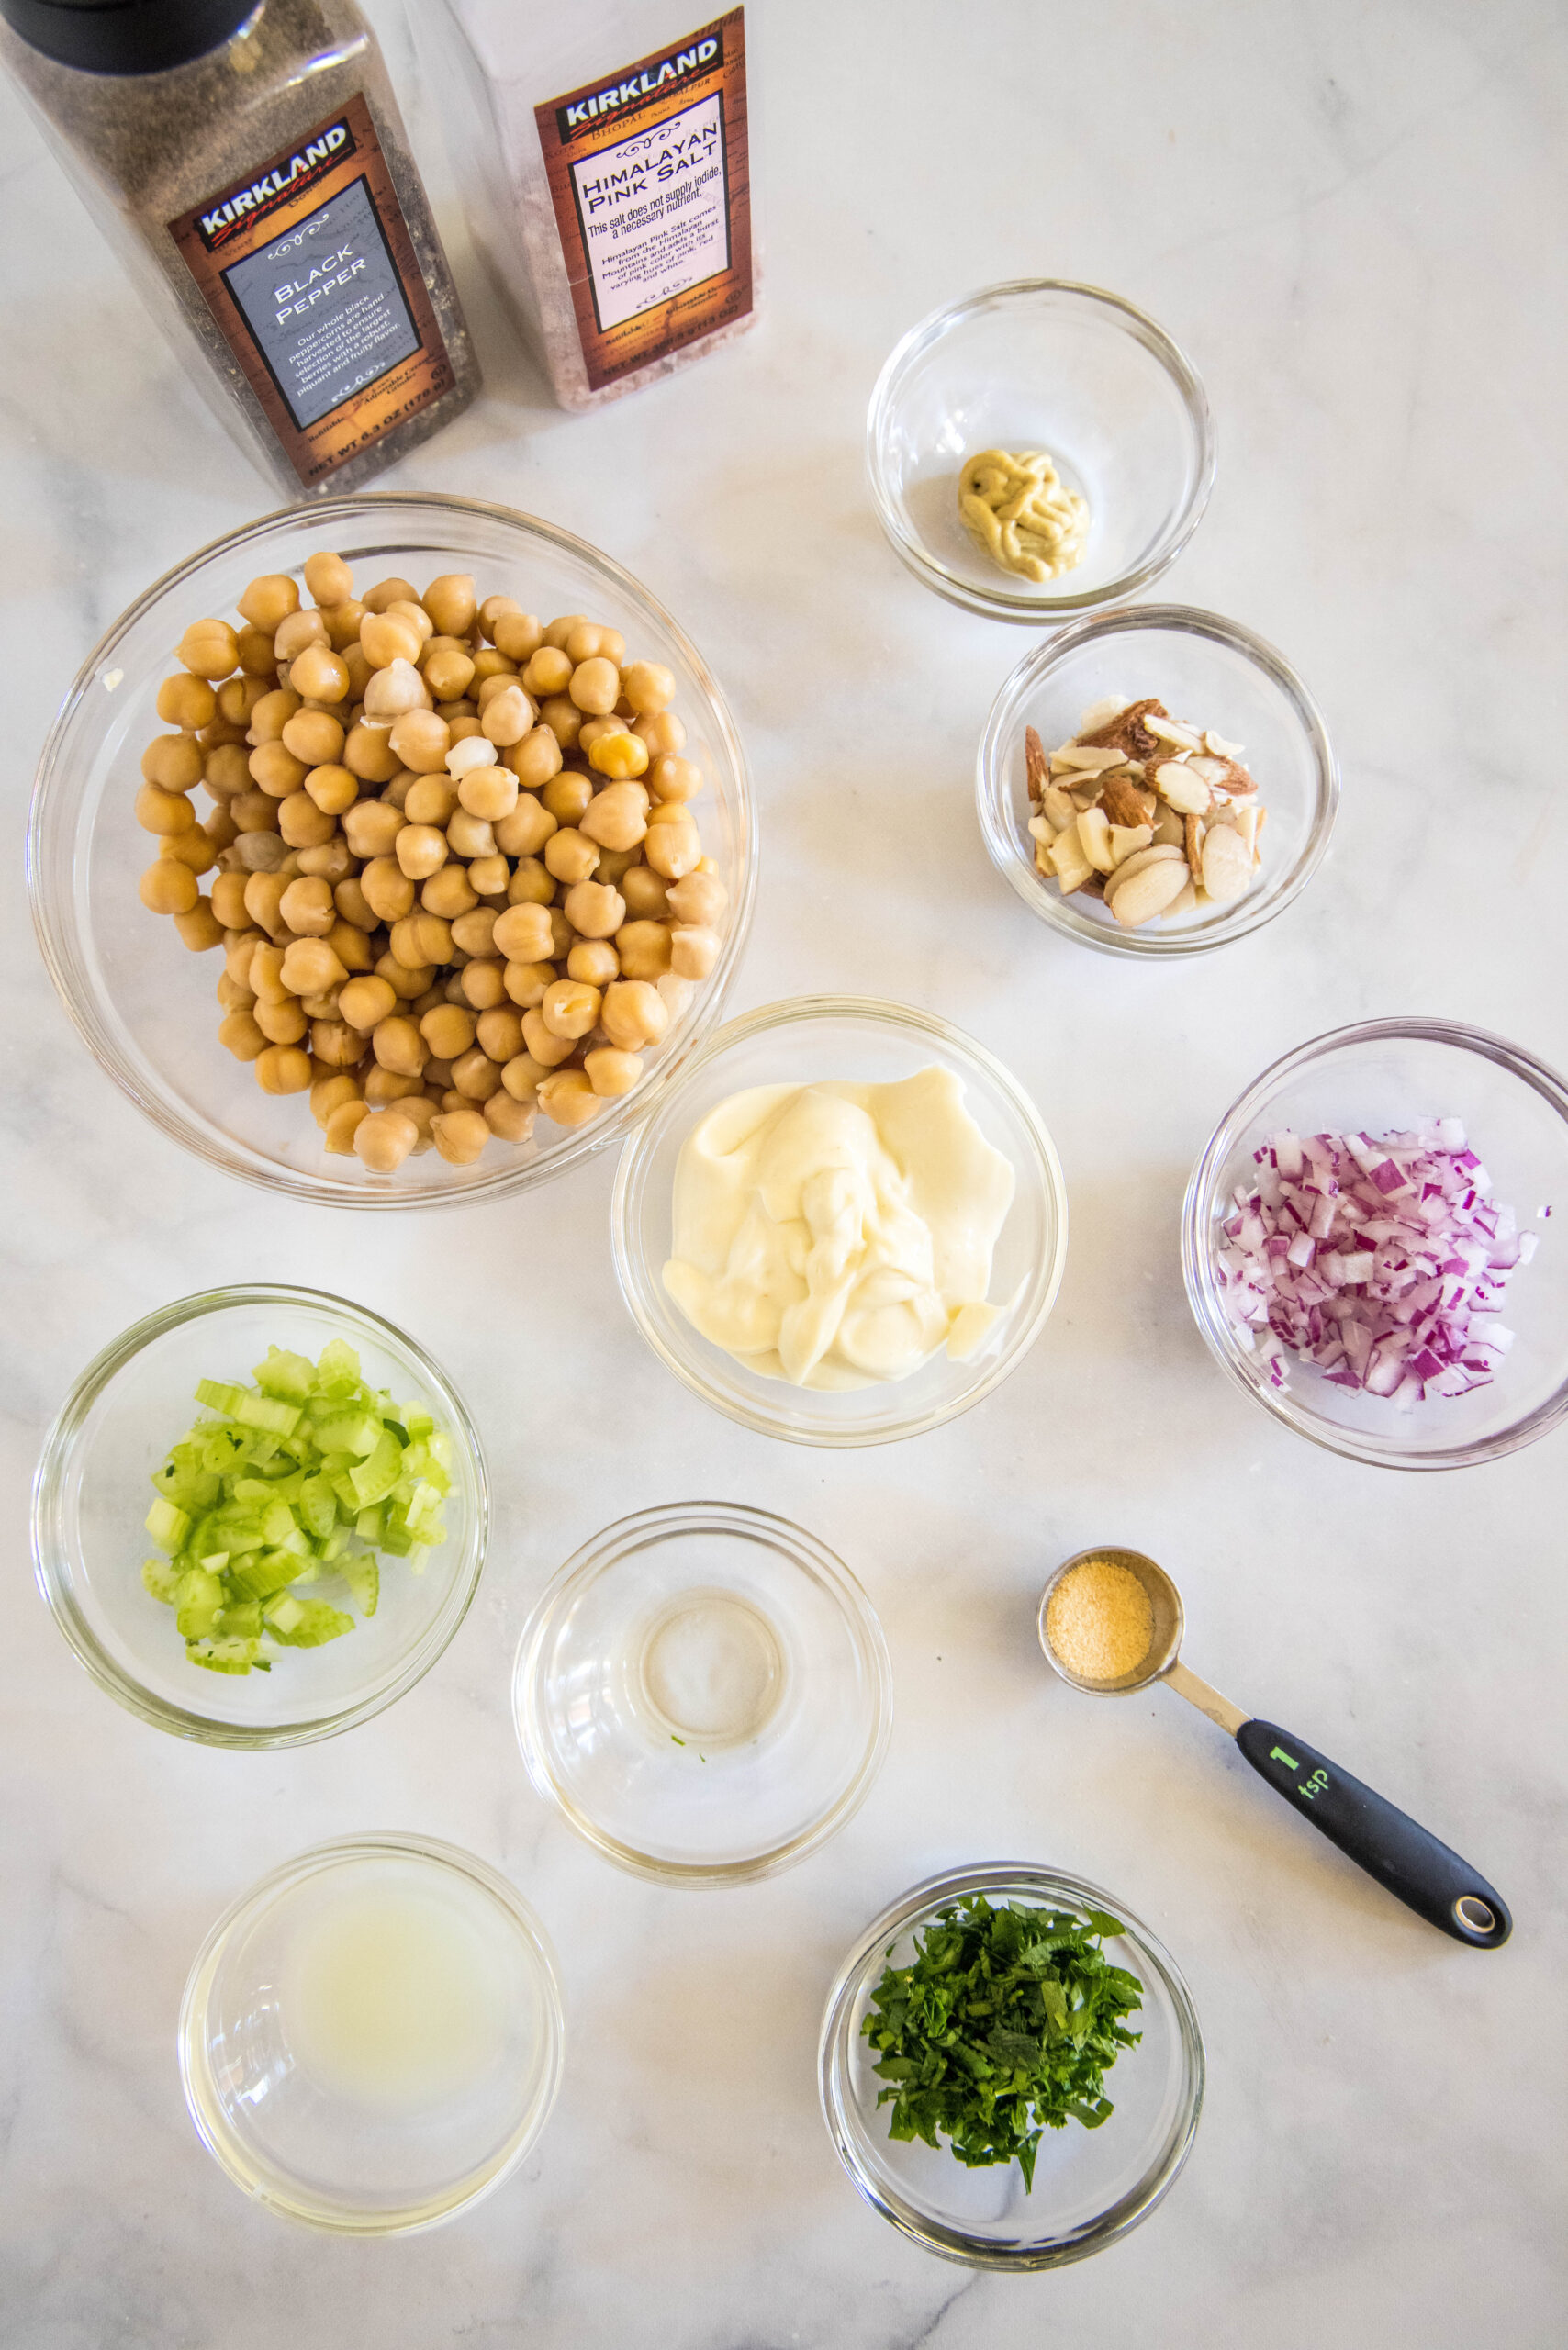 Ingredients for chickpea chicken salad.